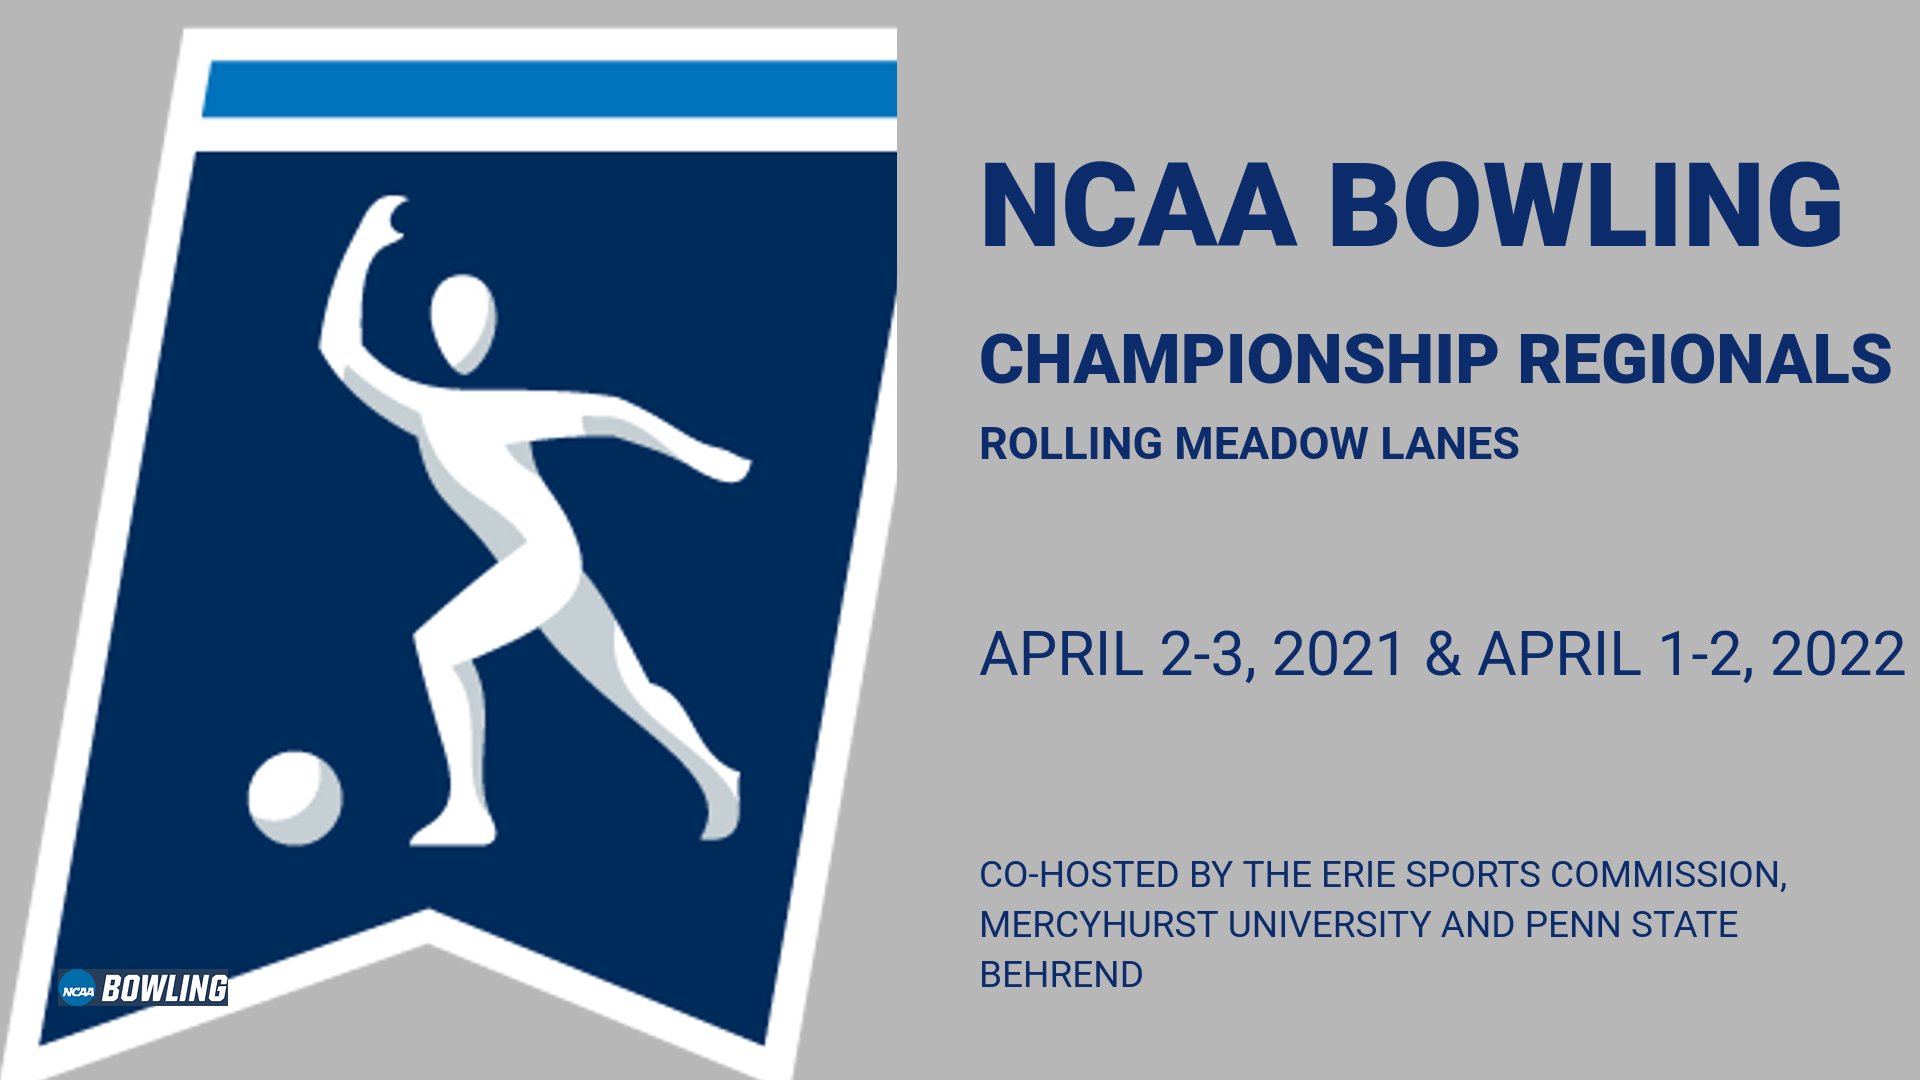 Behrend Athletics to Co-Host NCAA Bowling Championship Regionals